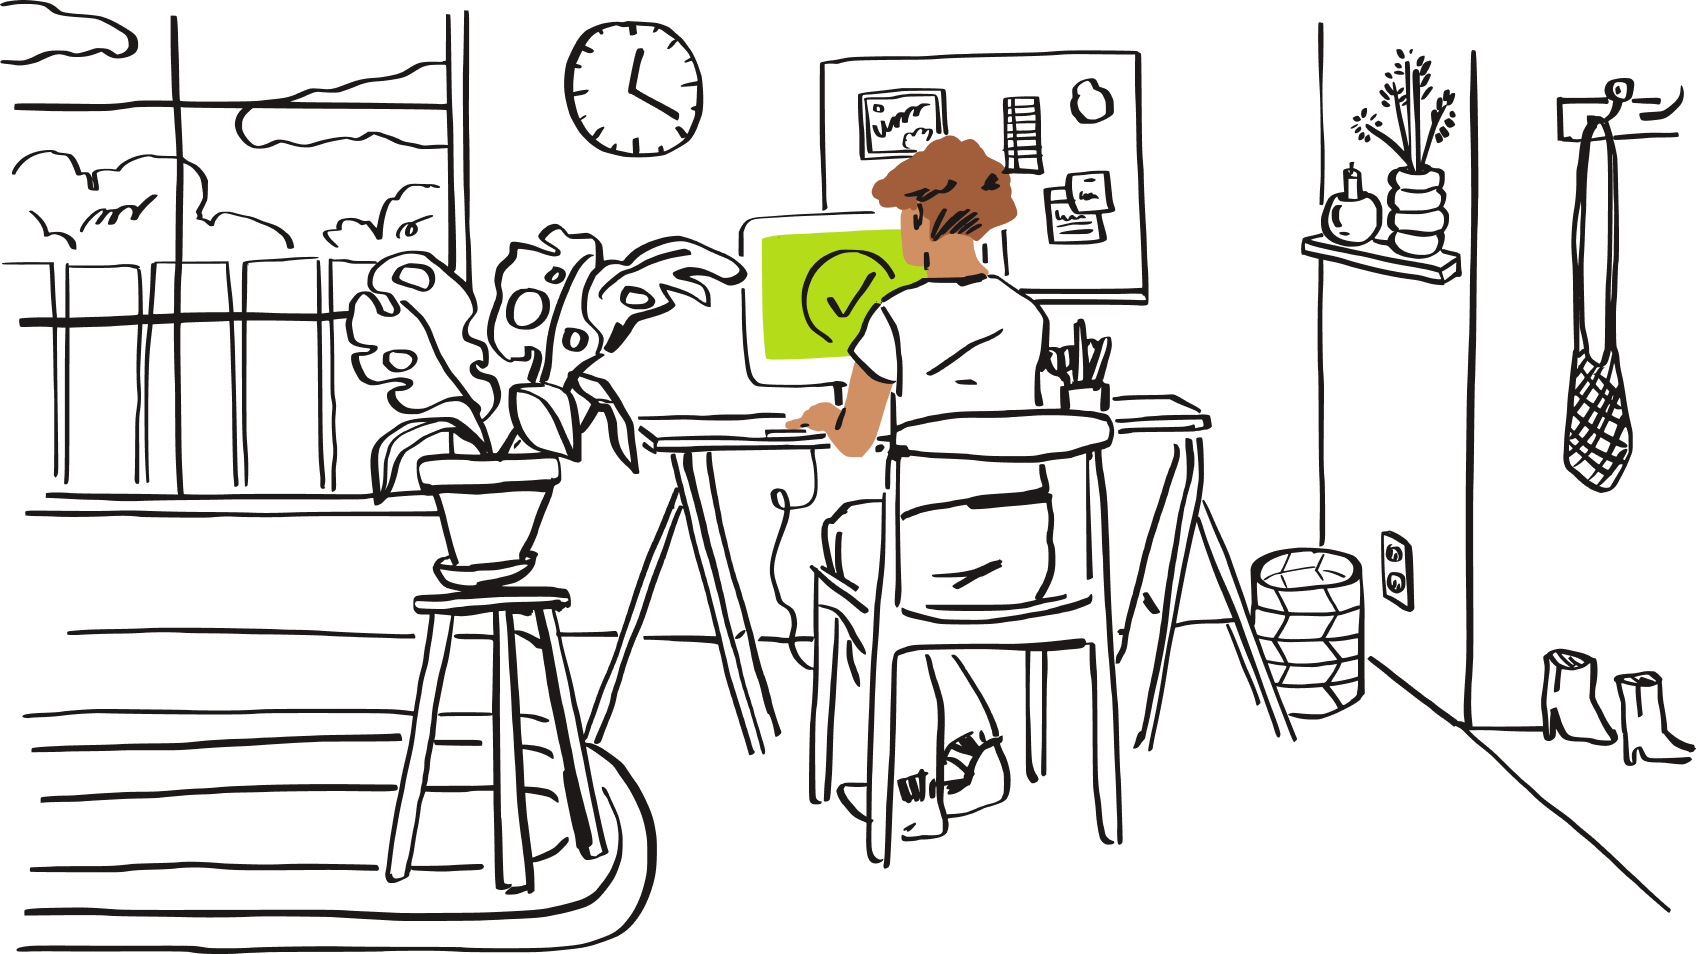 An illustration of a person sat at a computer with a green check mark displayed on the screen.